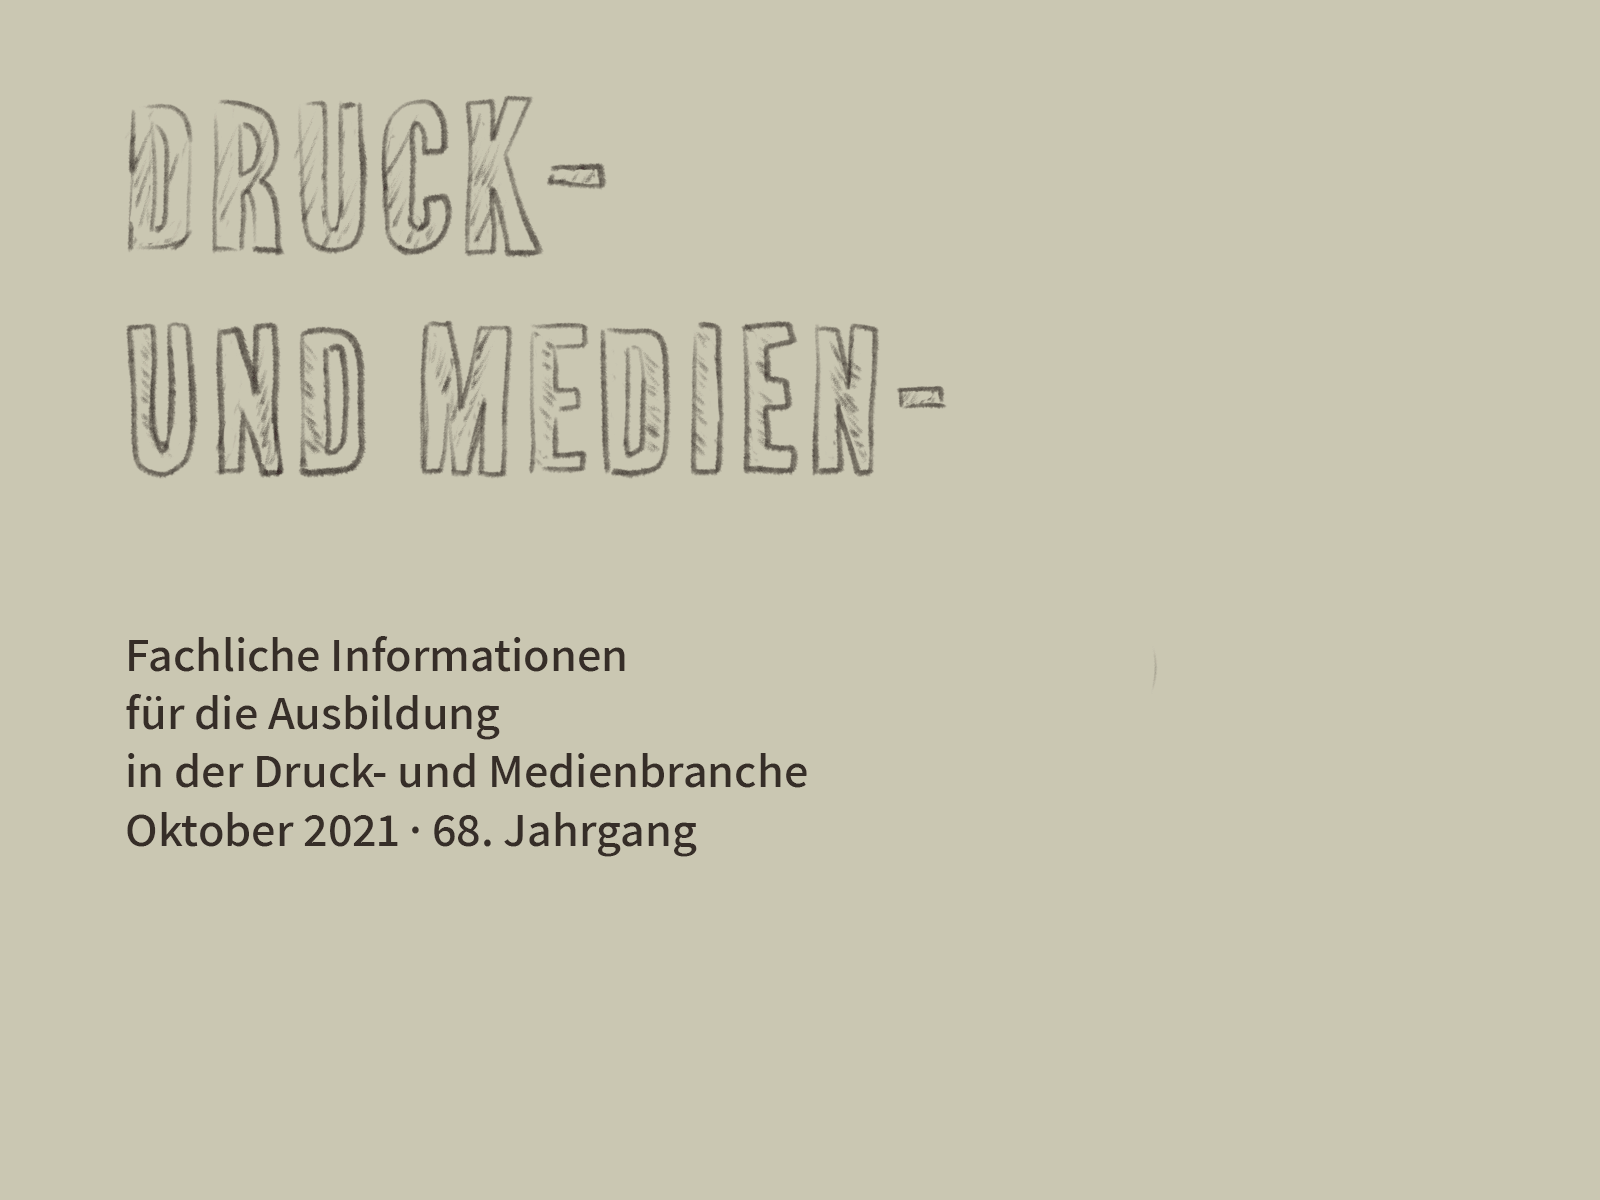 Title Competition Druck- und Medien-Abc – loreatus animation cmyk cover competition cover design design druck und medien graphic design magazine cover print print and media titelgestaltung zfa medien